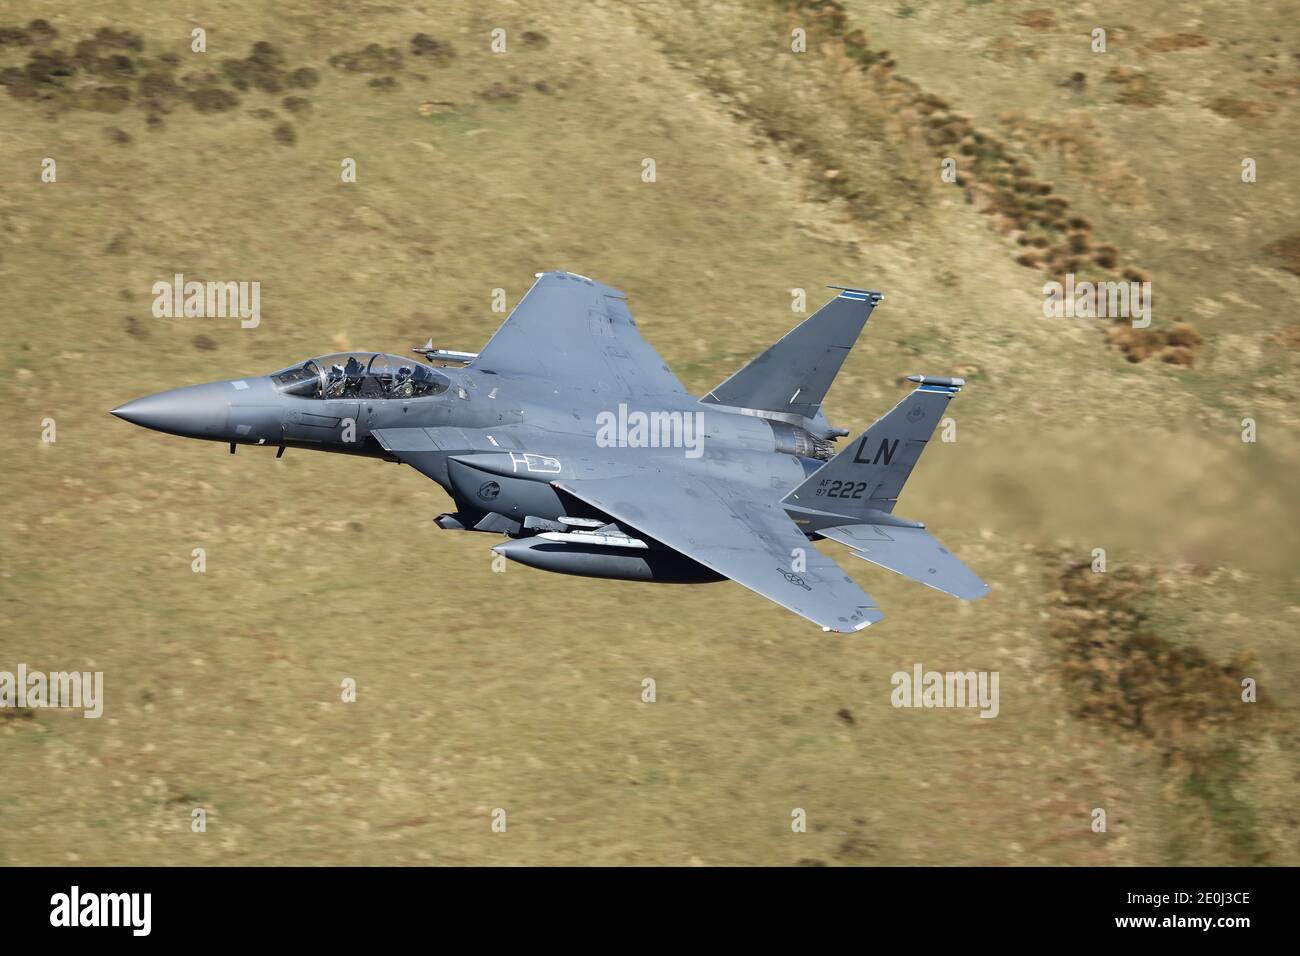 USAF F-15E Strike Eagle on a low-level flight in the 'mach loop' area of Wales, United Kingdom. Stock Photo